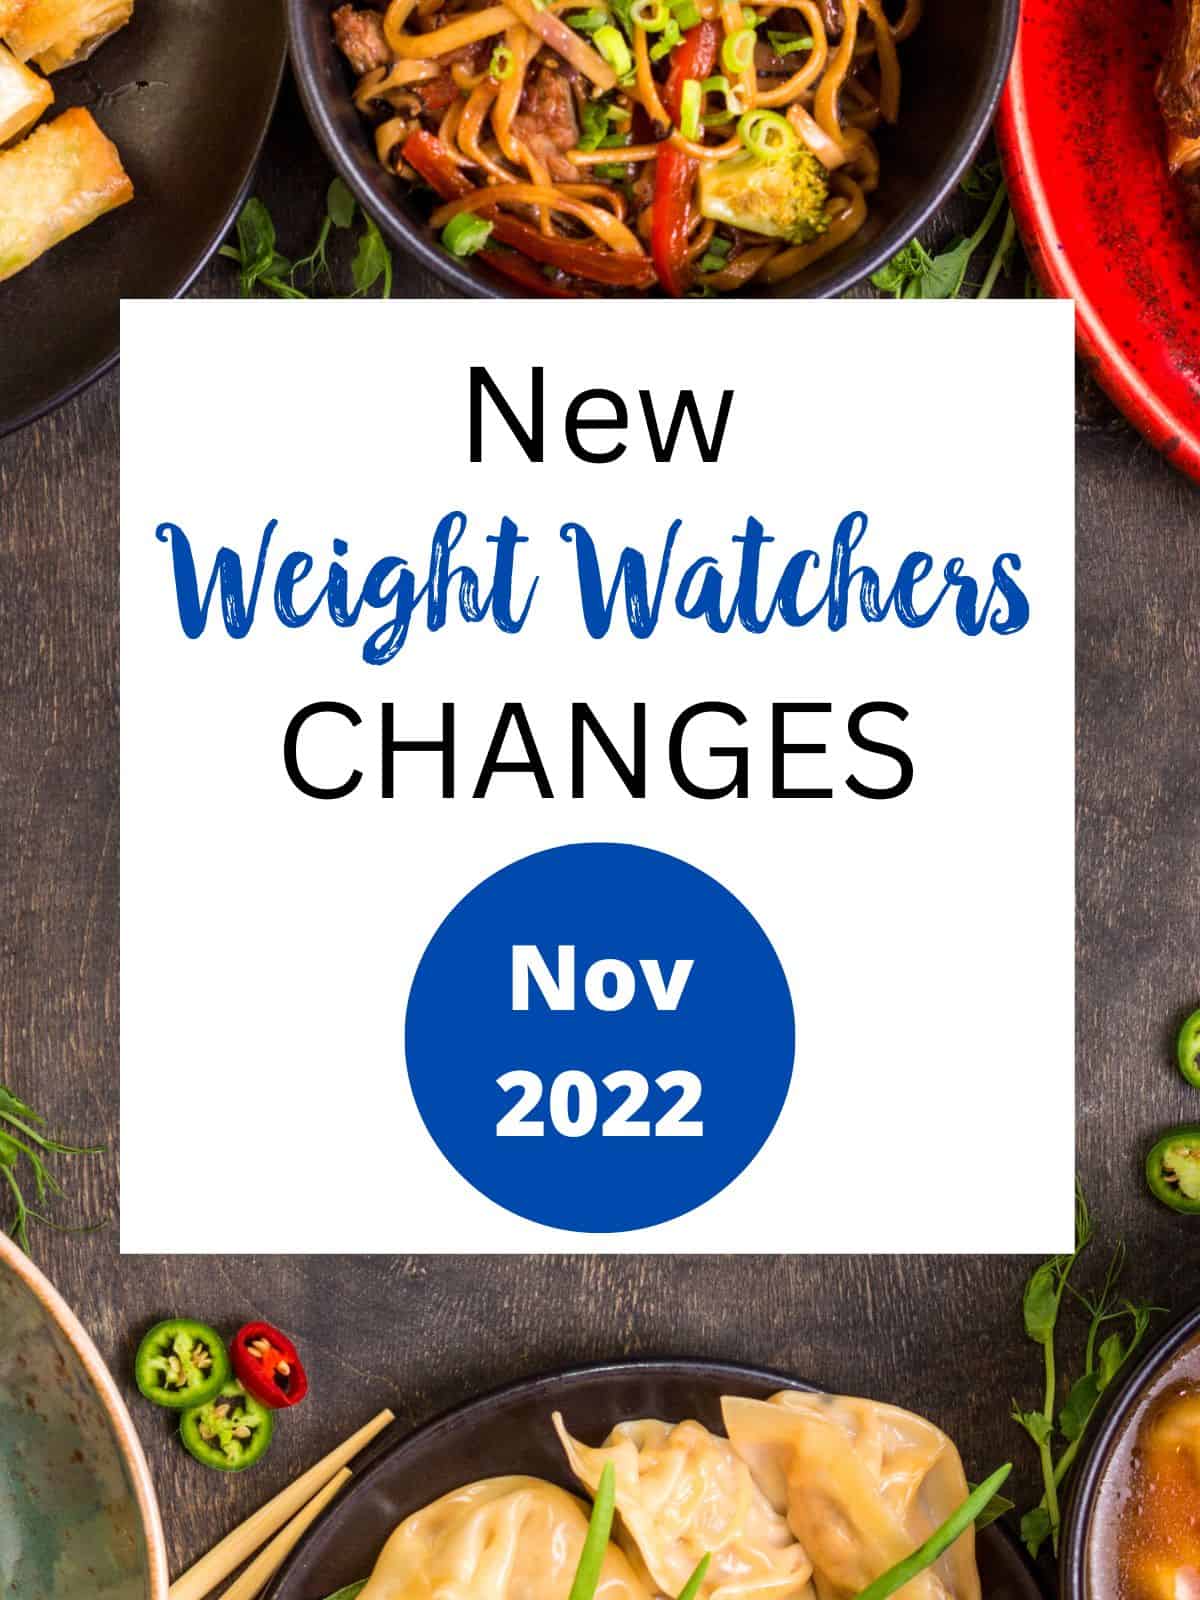 A table of food with text overlay stating 'New Weight Watchers Changes November 2022'.